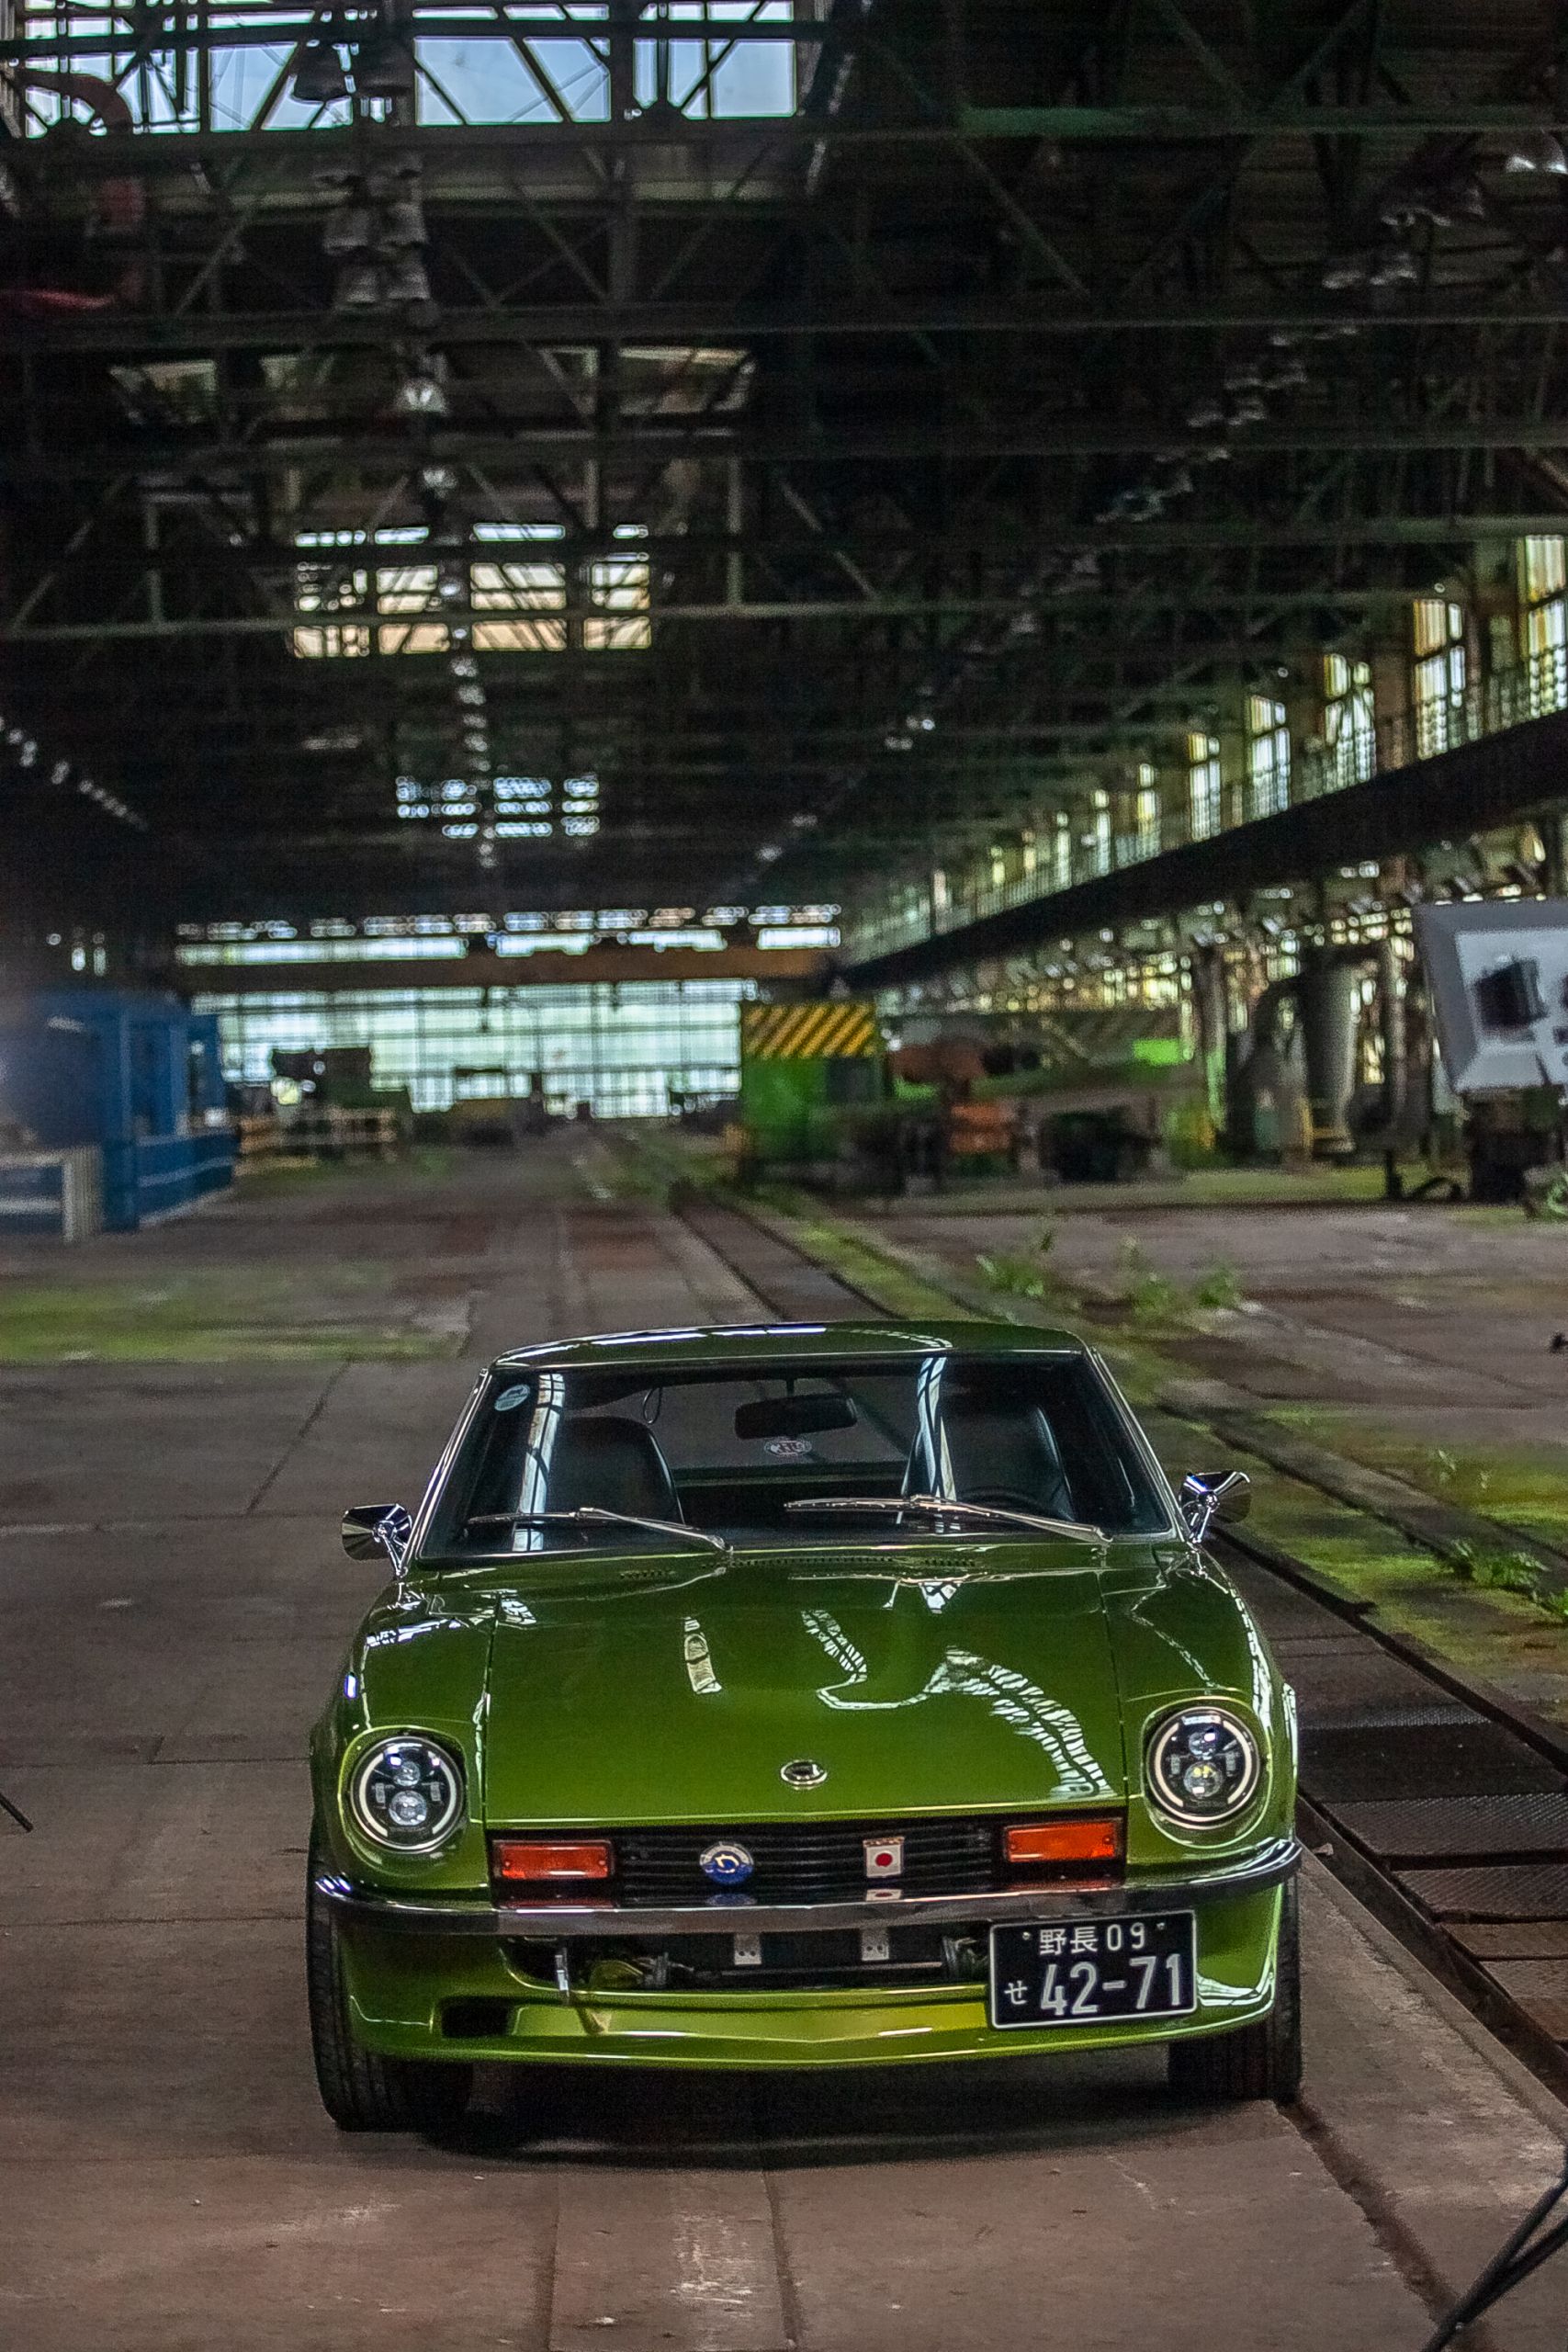 Fully restored 1976 DATSUN 280Z AVOCADO GREEN for sale with new front spoiler